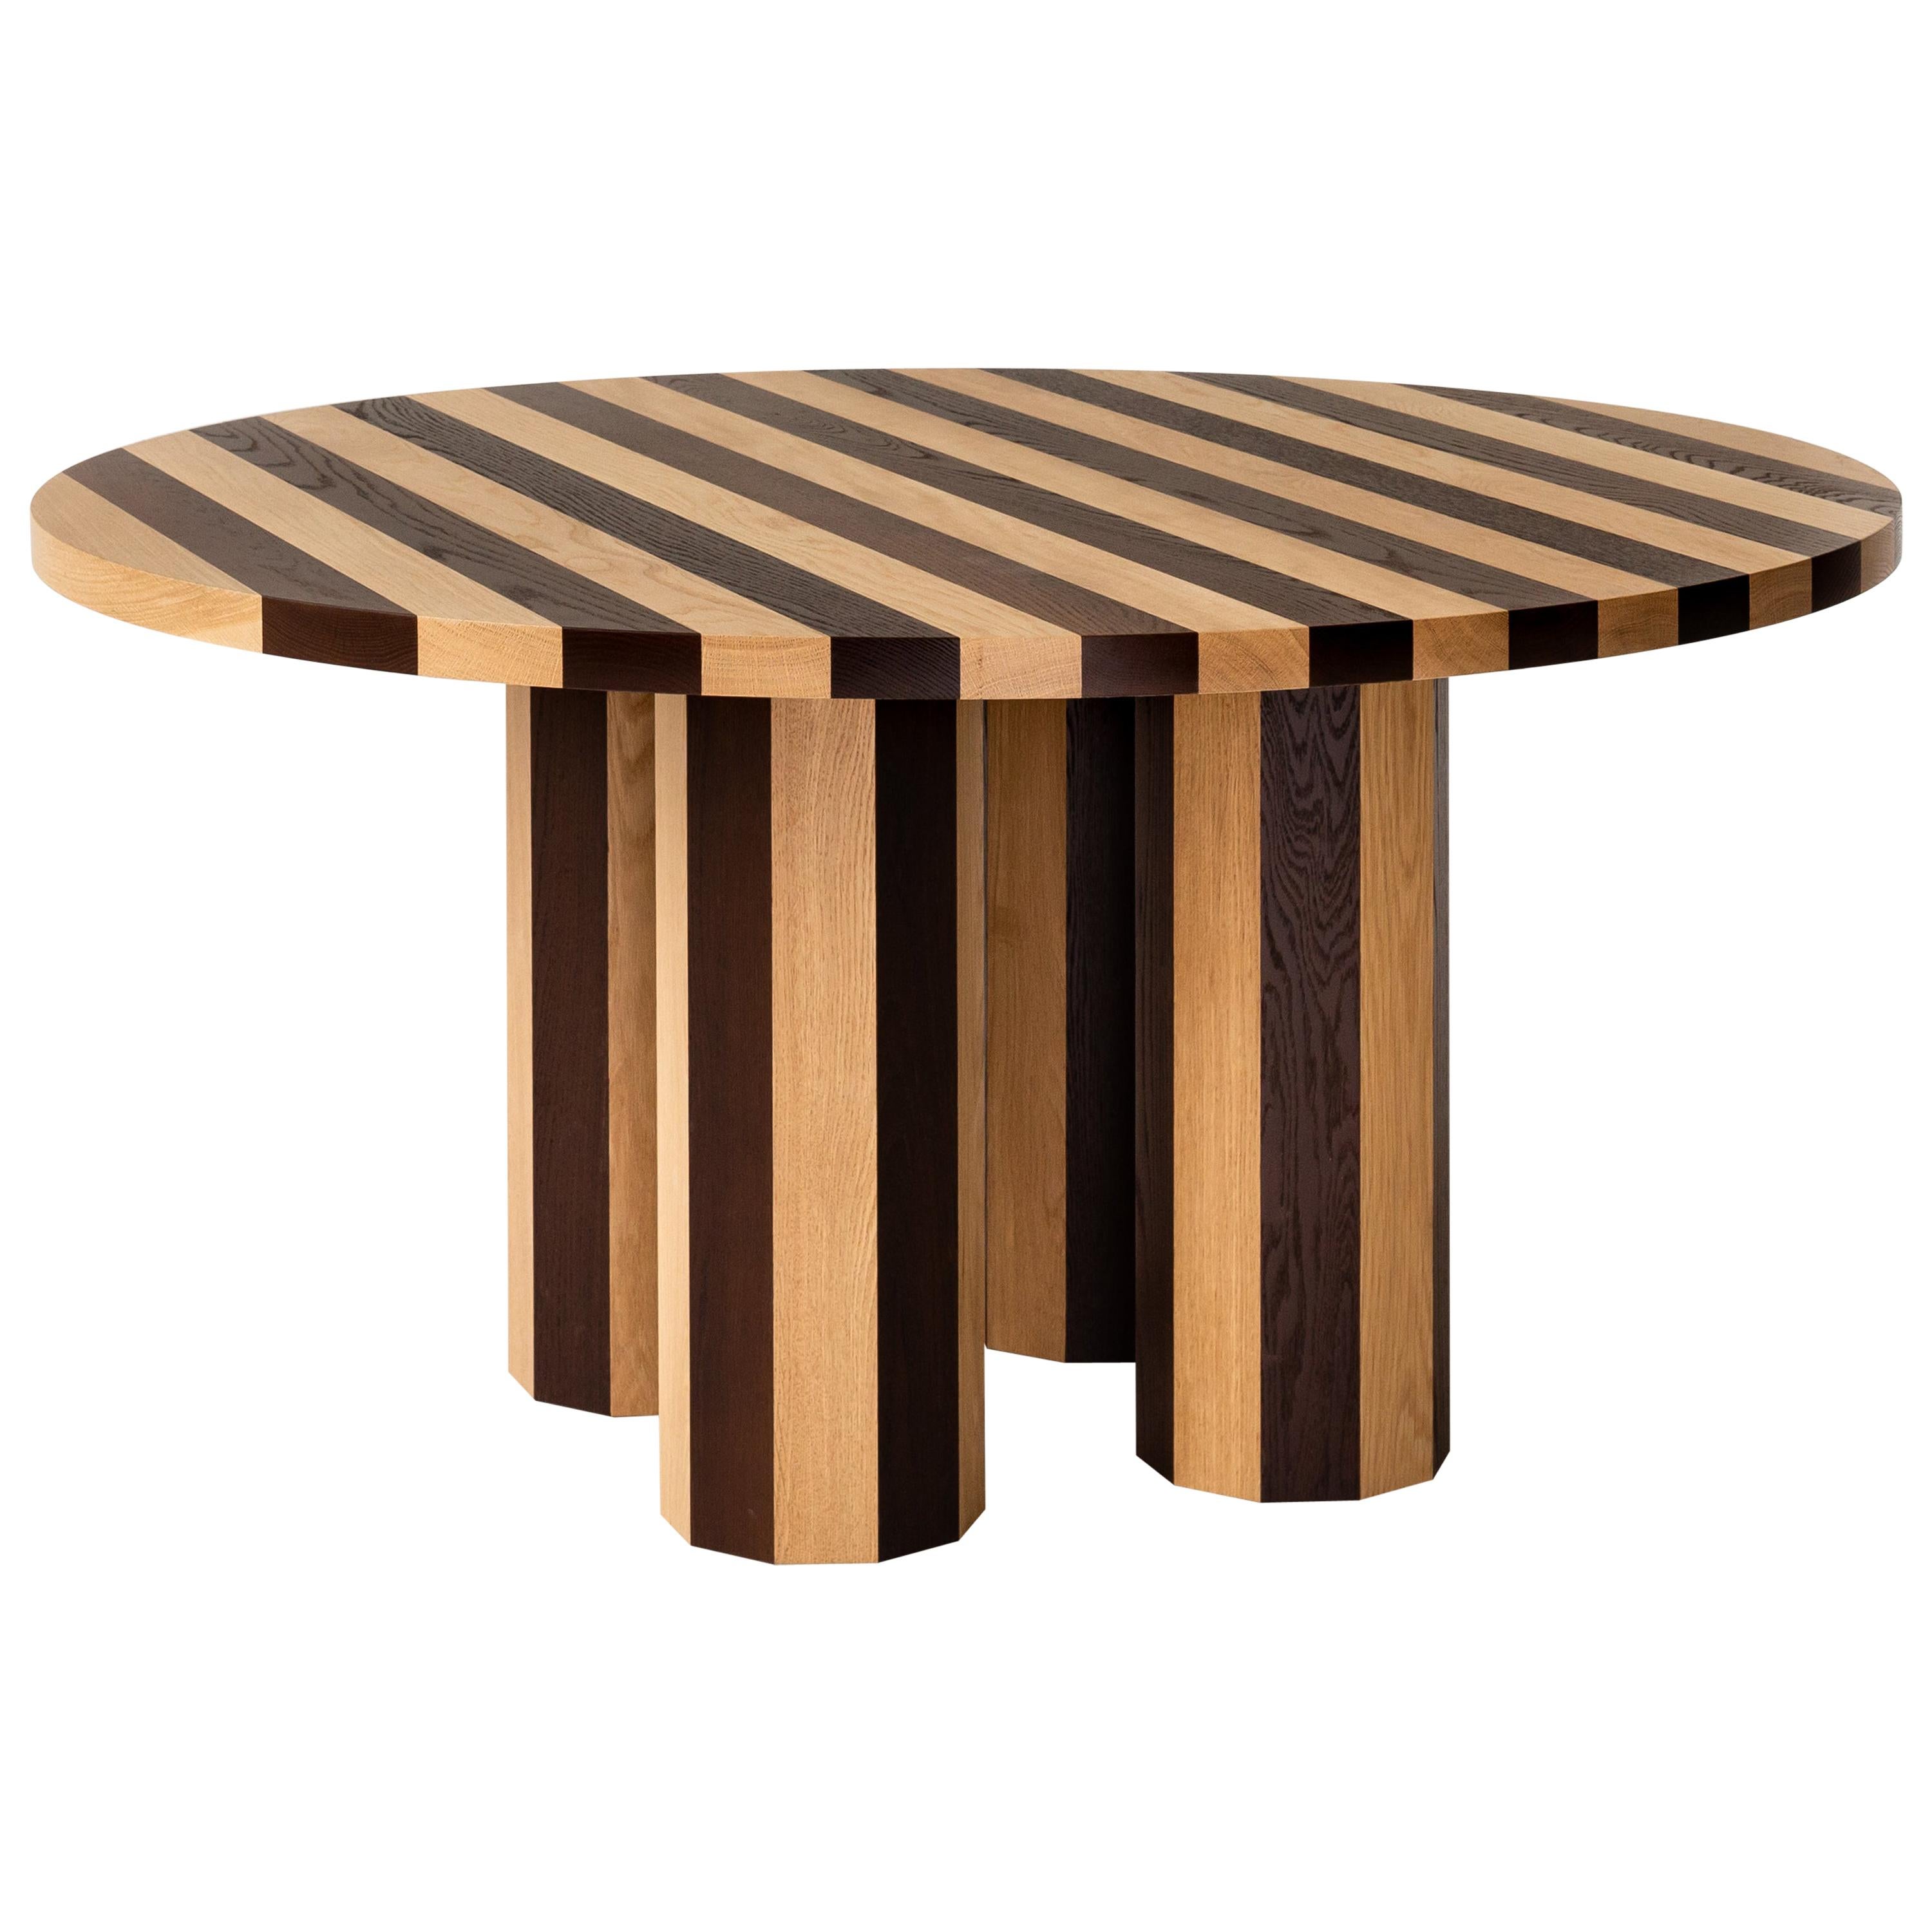 Round Cooperage Dining Table in Striped Oak by Fort Standard, in Stock